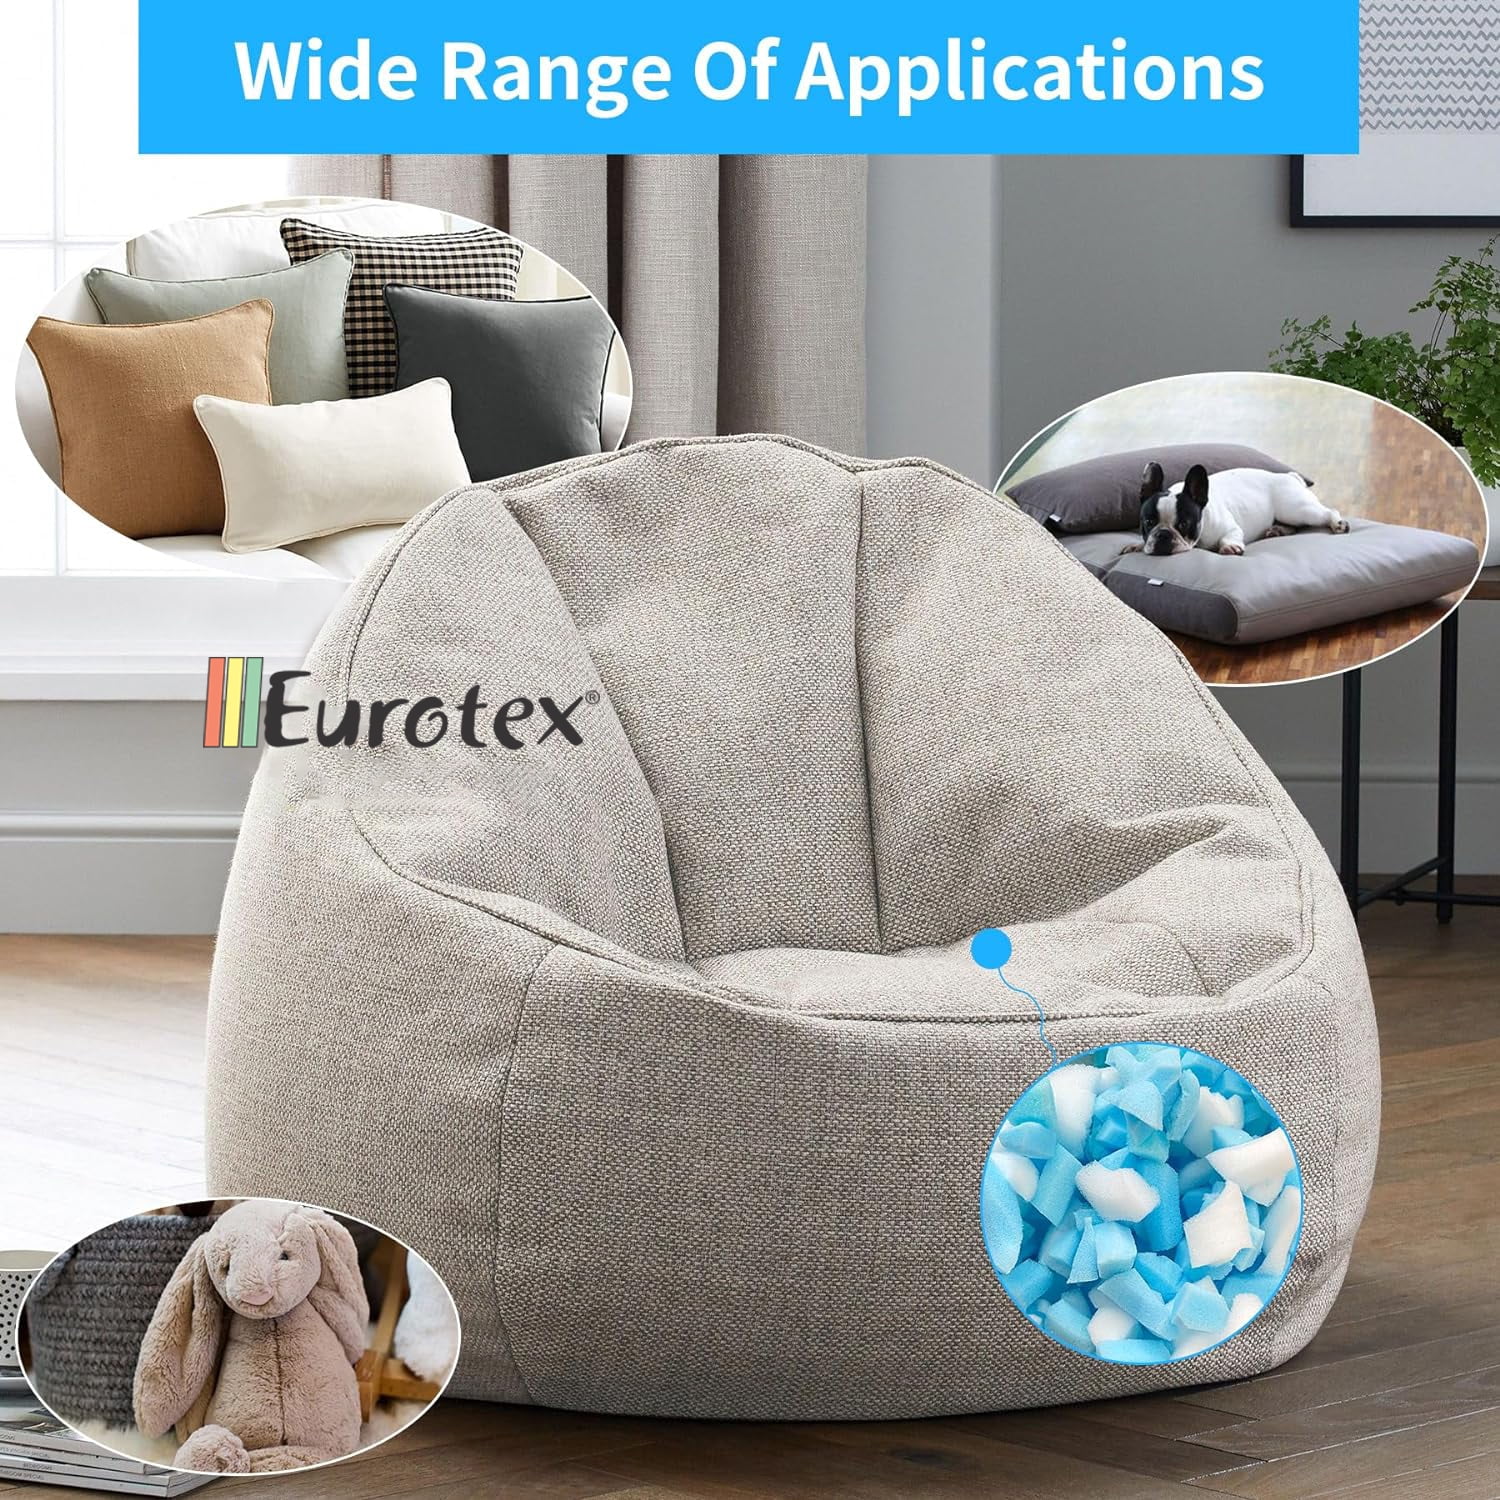 Eurotex Shredded Memory Foam Filling 10lbs for Bean Bag Filler, Particles Refill, Premium Soft and Comfortable Stuffing, Size: 10 lbs